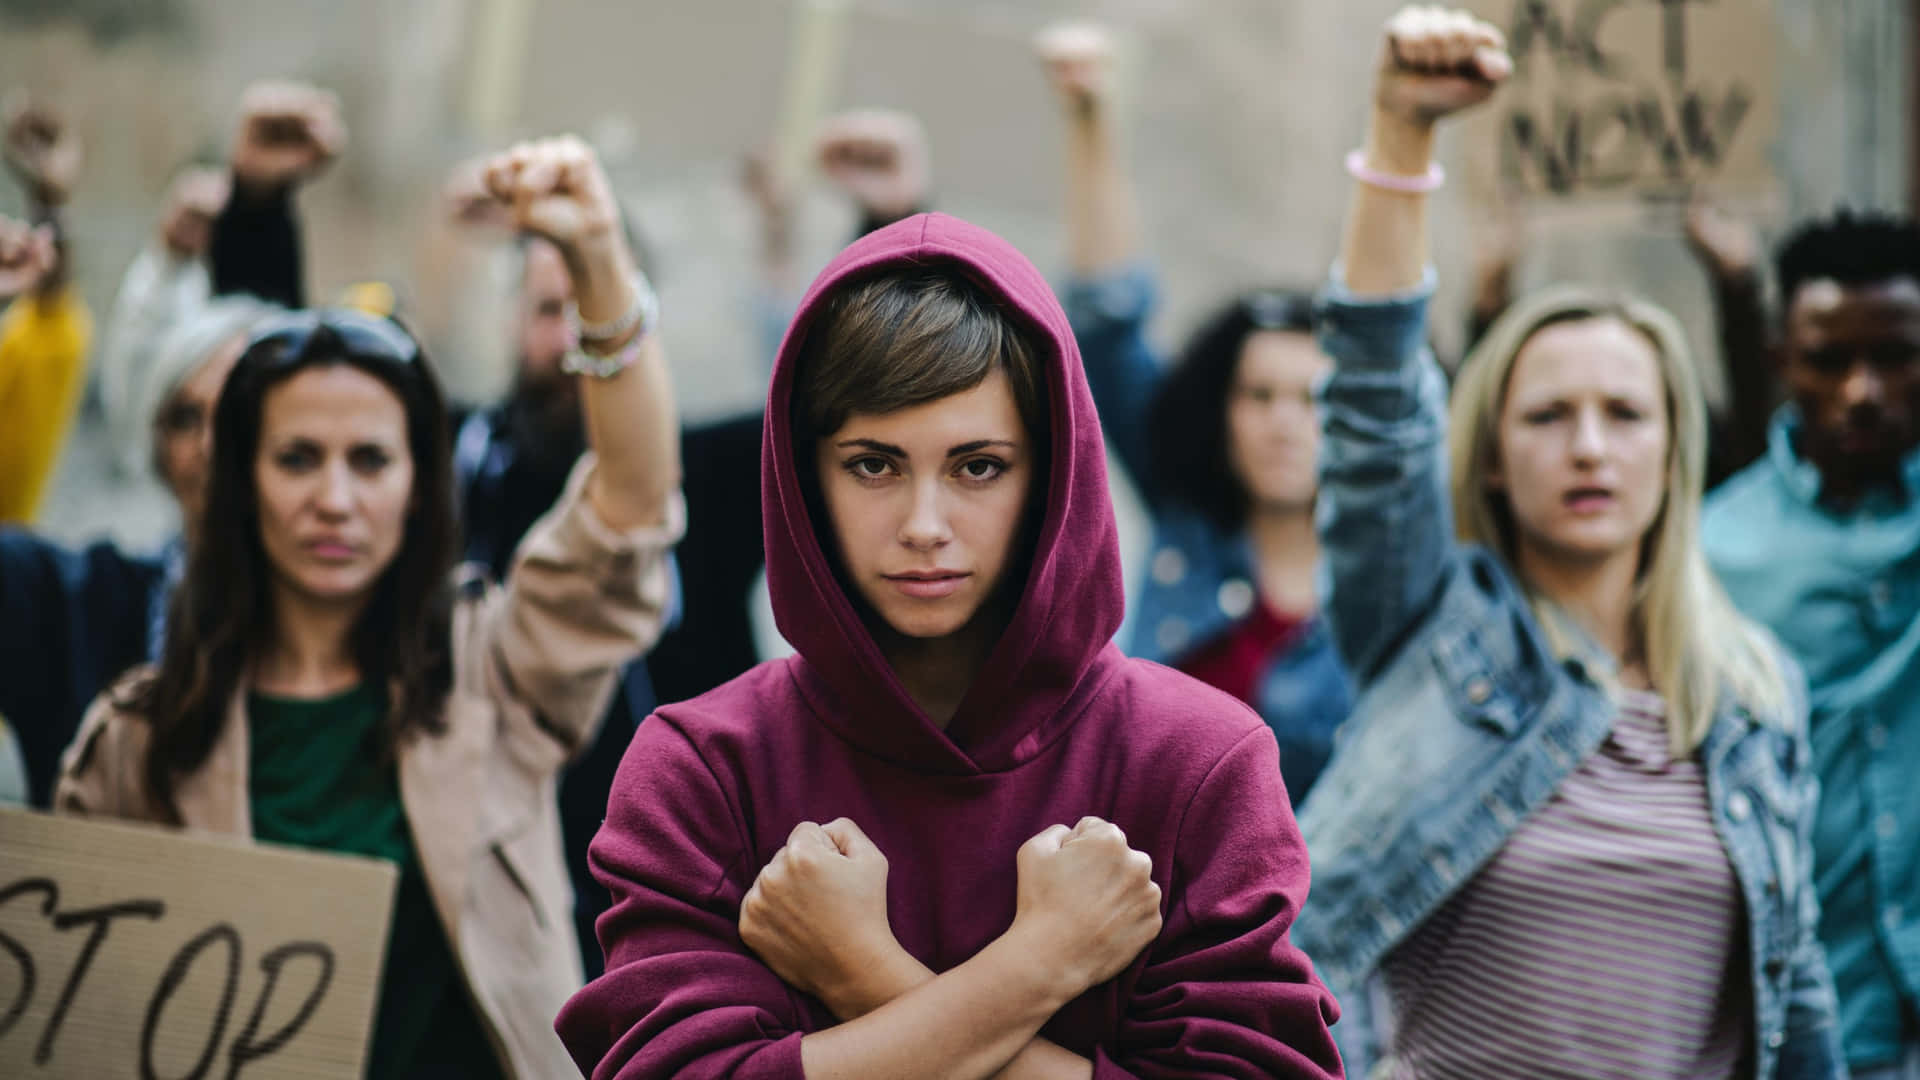 Protesters Determined Stance.jpg Wallpaper